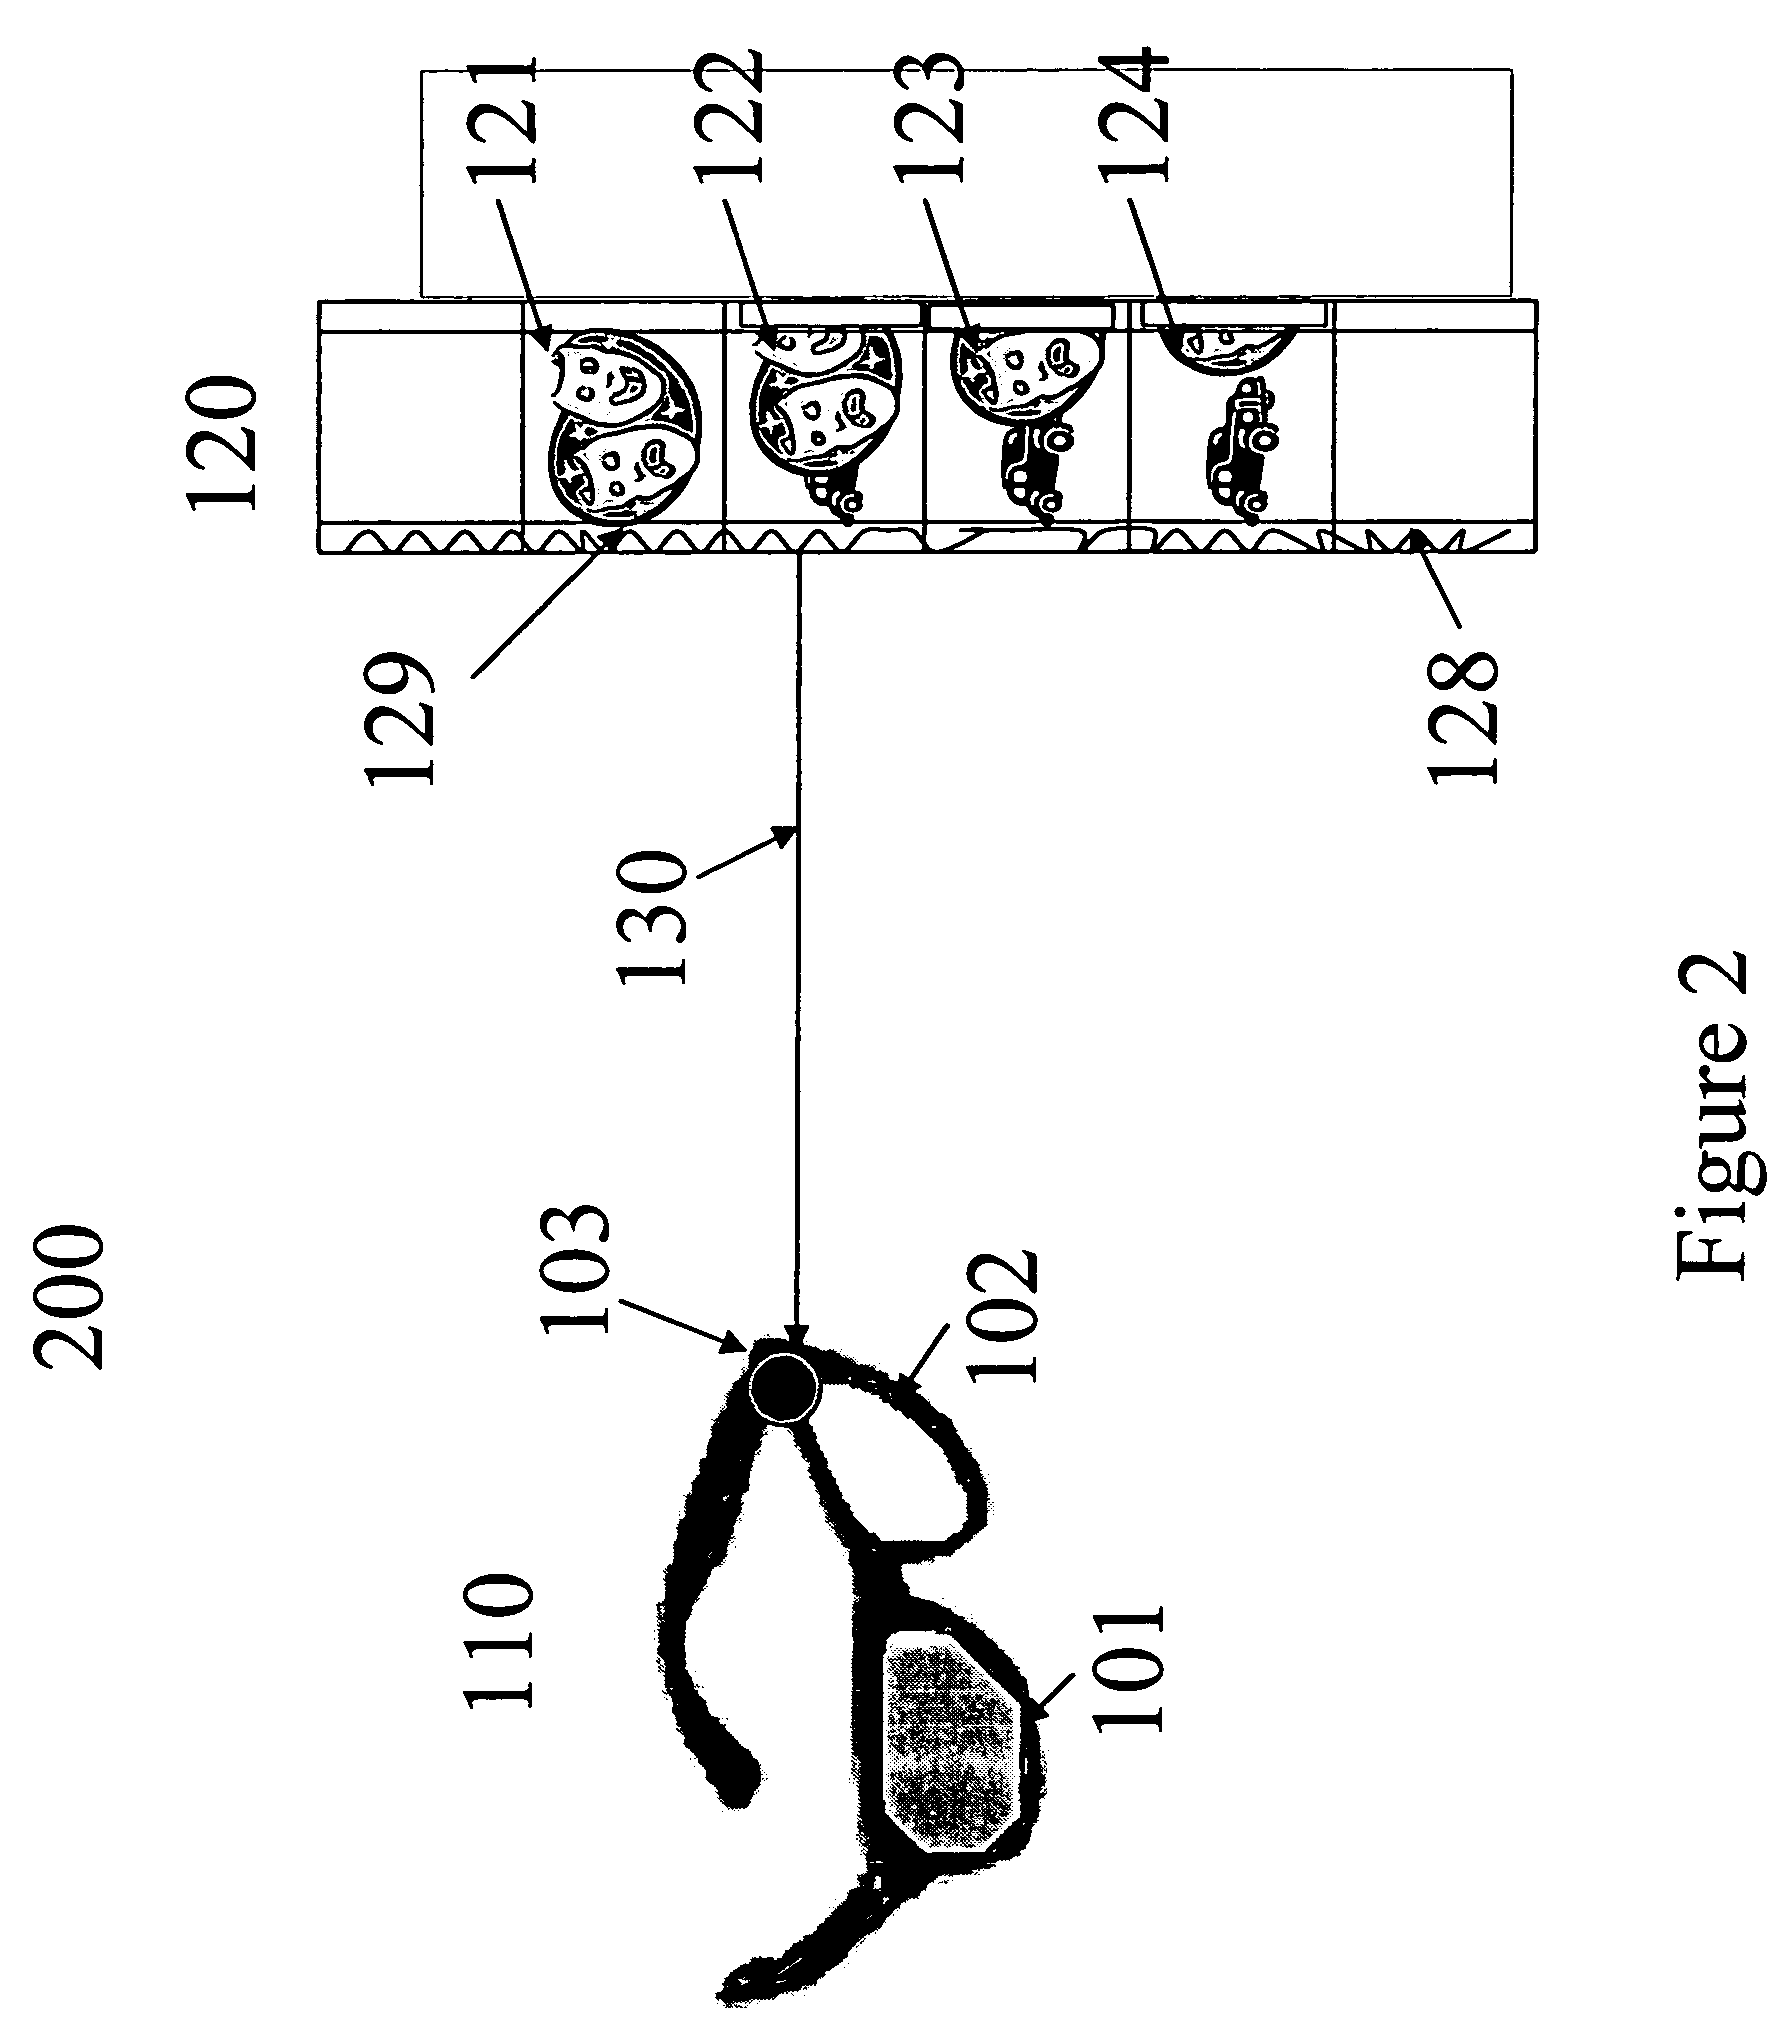 System and method for Pulfrich Filter Spectacles